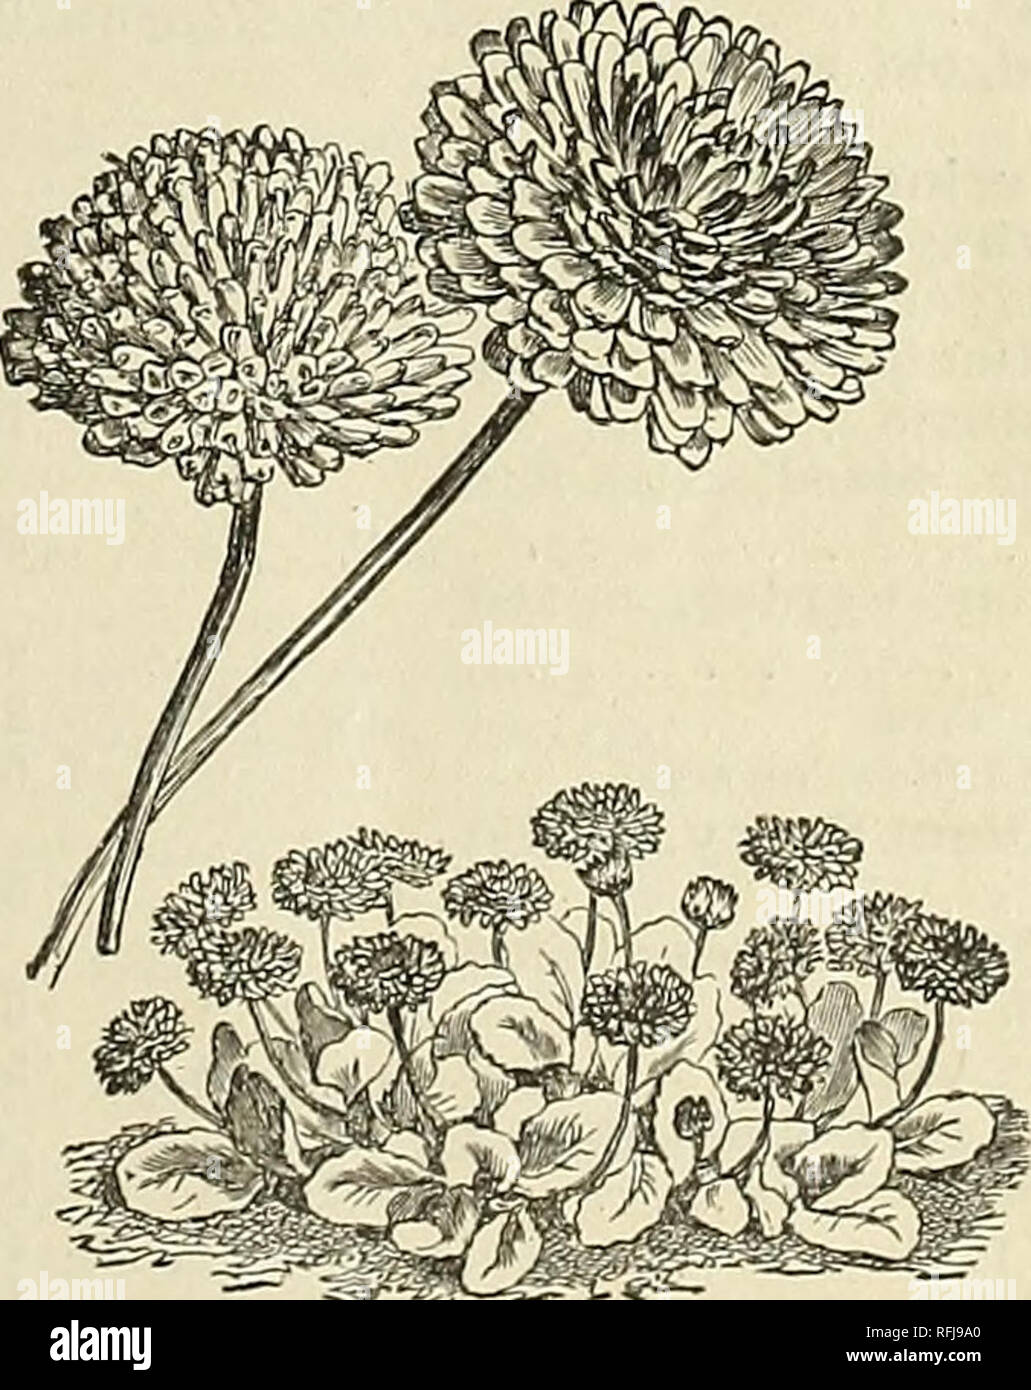 . Wholesale catalogue of seeds, bulbs and plants. Nursery stock New York (State) Catalogs; Vegetables Seeds Catalogs; Flowers Seeds Catalogs; Bulbs (Plants) Catalogs; Plants, Ornamental Catalogs. Alyssum. TrsdG PsckBt AriARANTHUS caudatus. (Love of about Lies Bleeding) .... Salicifolius (Fountain Plant) Tricolor. (Joseph's Coat) . . &quot; Splendens AnPELOPSIS Veitchii. Boston or Japanese Ivy . .$1.50 lb. ANEHONE coronaria. Mixed, hard}' perennial ANCHUSA barrelieri ANTIRRHINUn majus. Tall mixed, snap dragons .... Giant Golden Queen .... Bright scarlet Queen of the North. White . Striped, yell Stock Photo